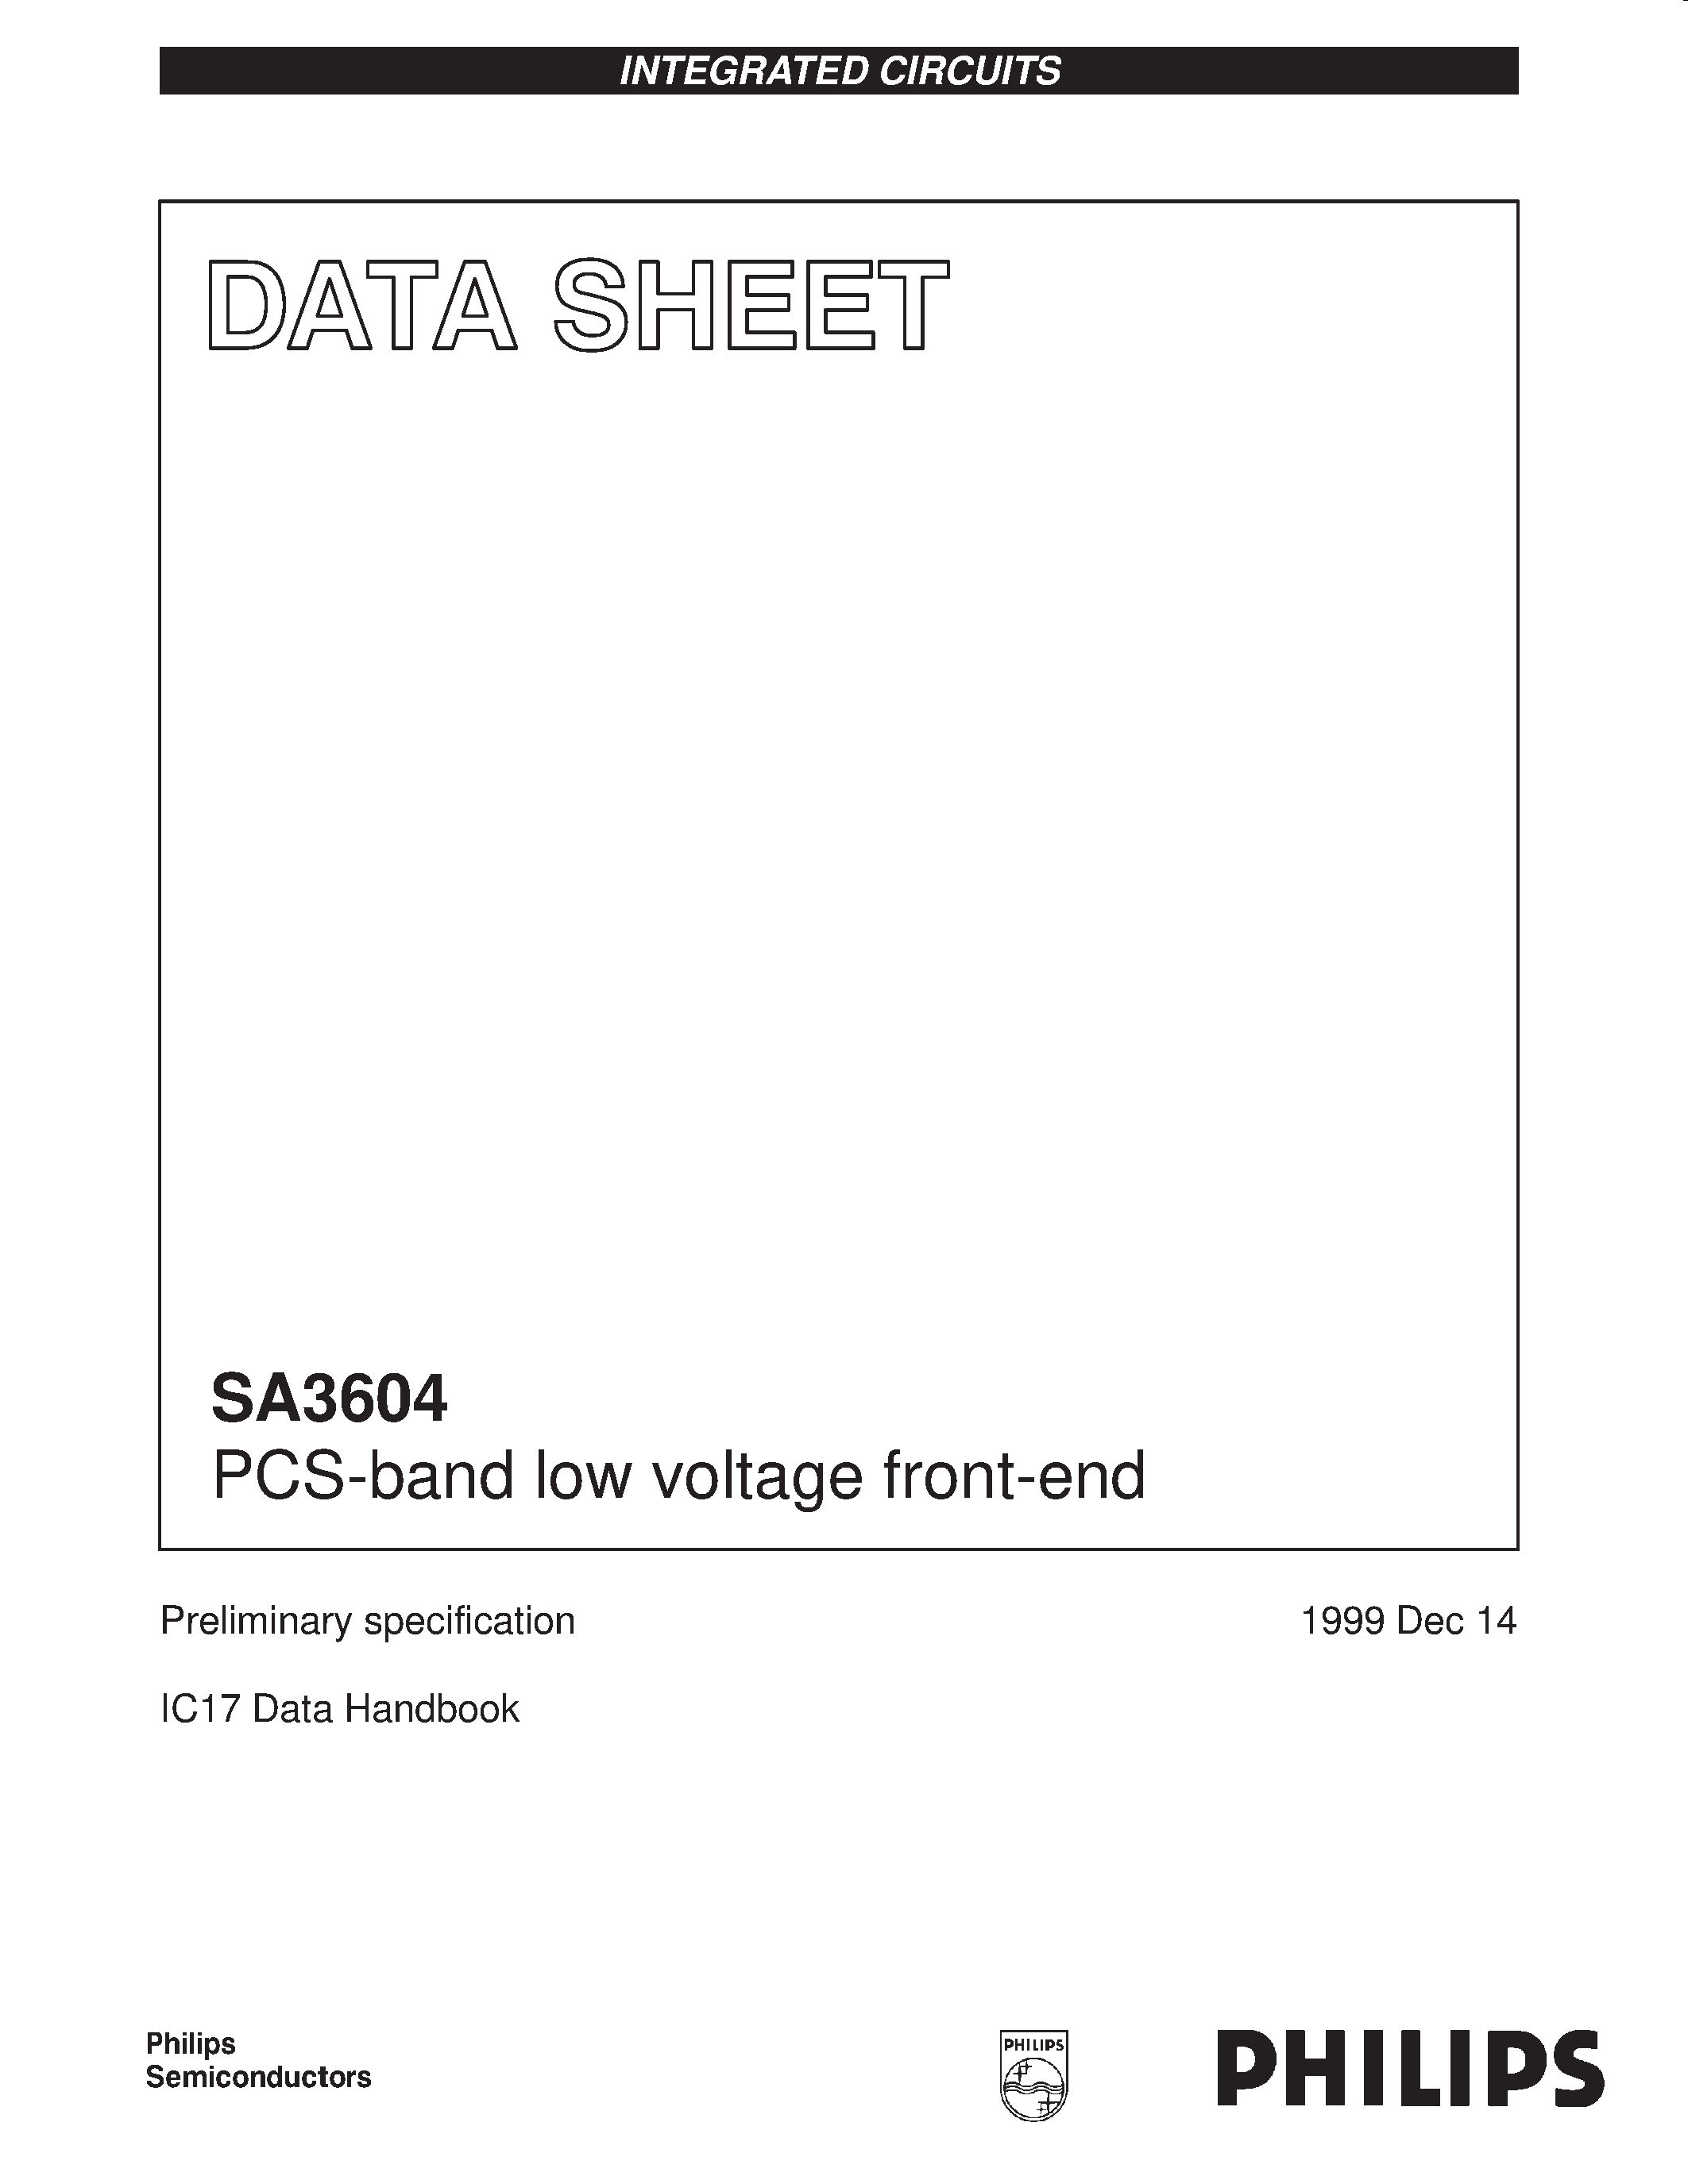 Datasheet SA3604 - PCS-band low voltage front-end page 1